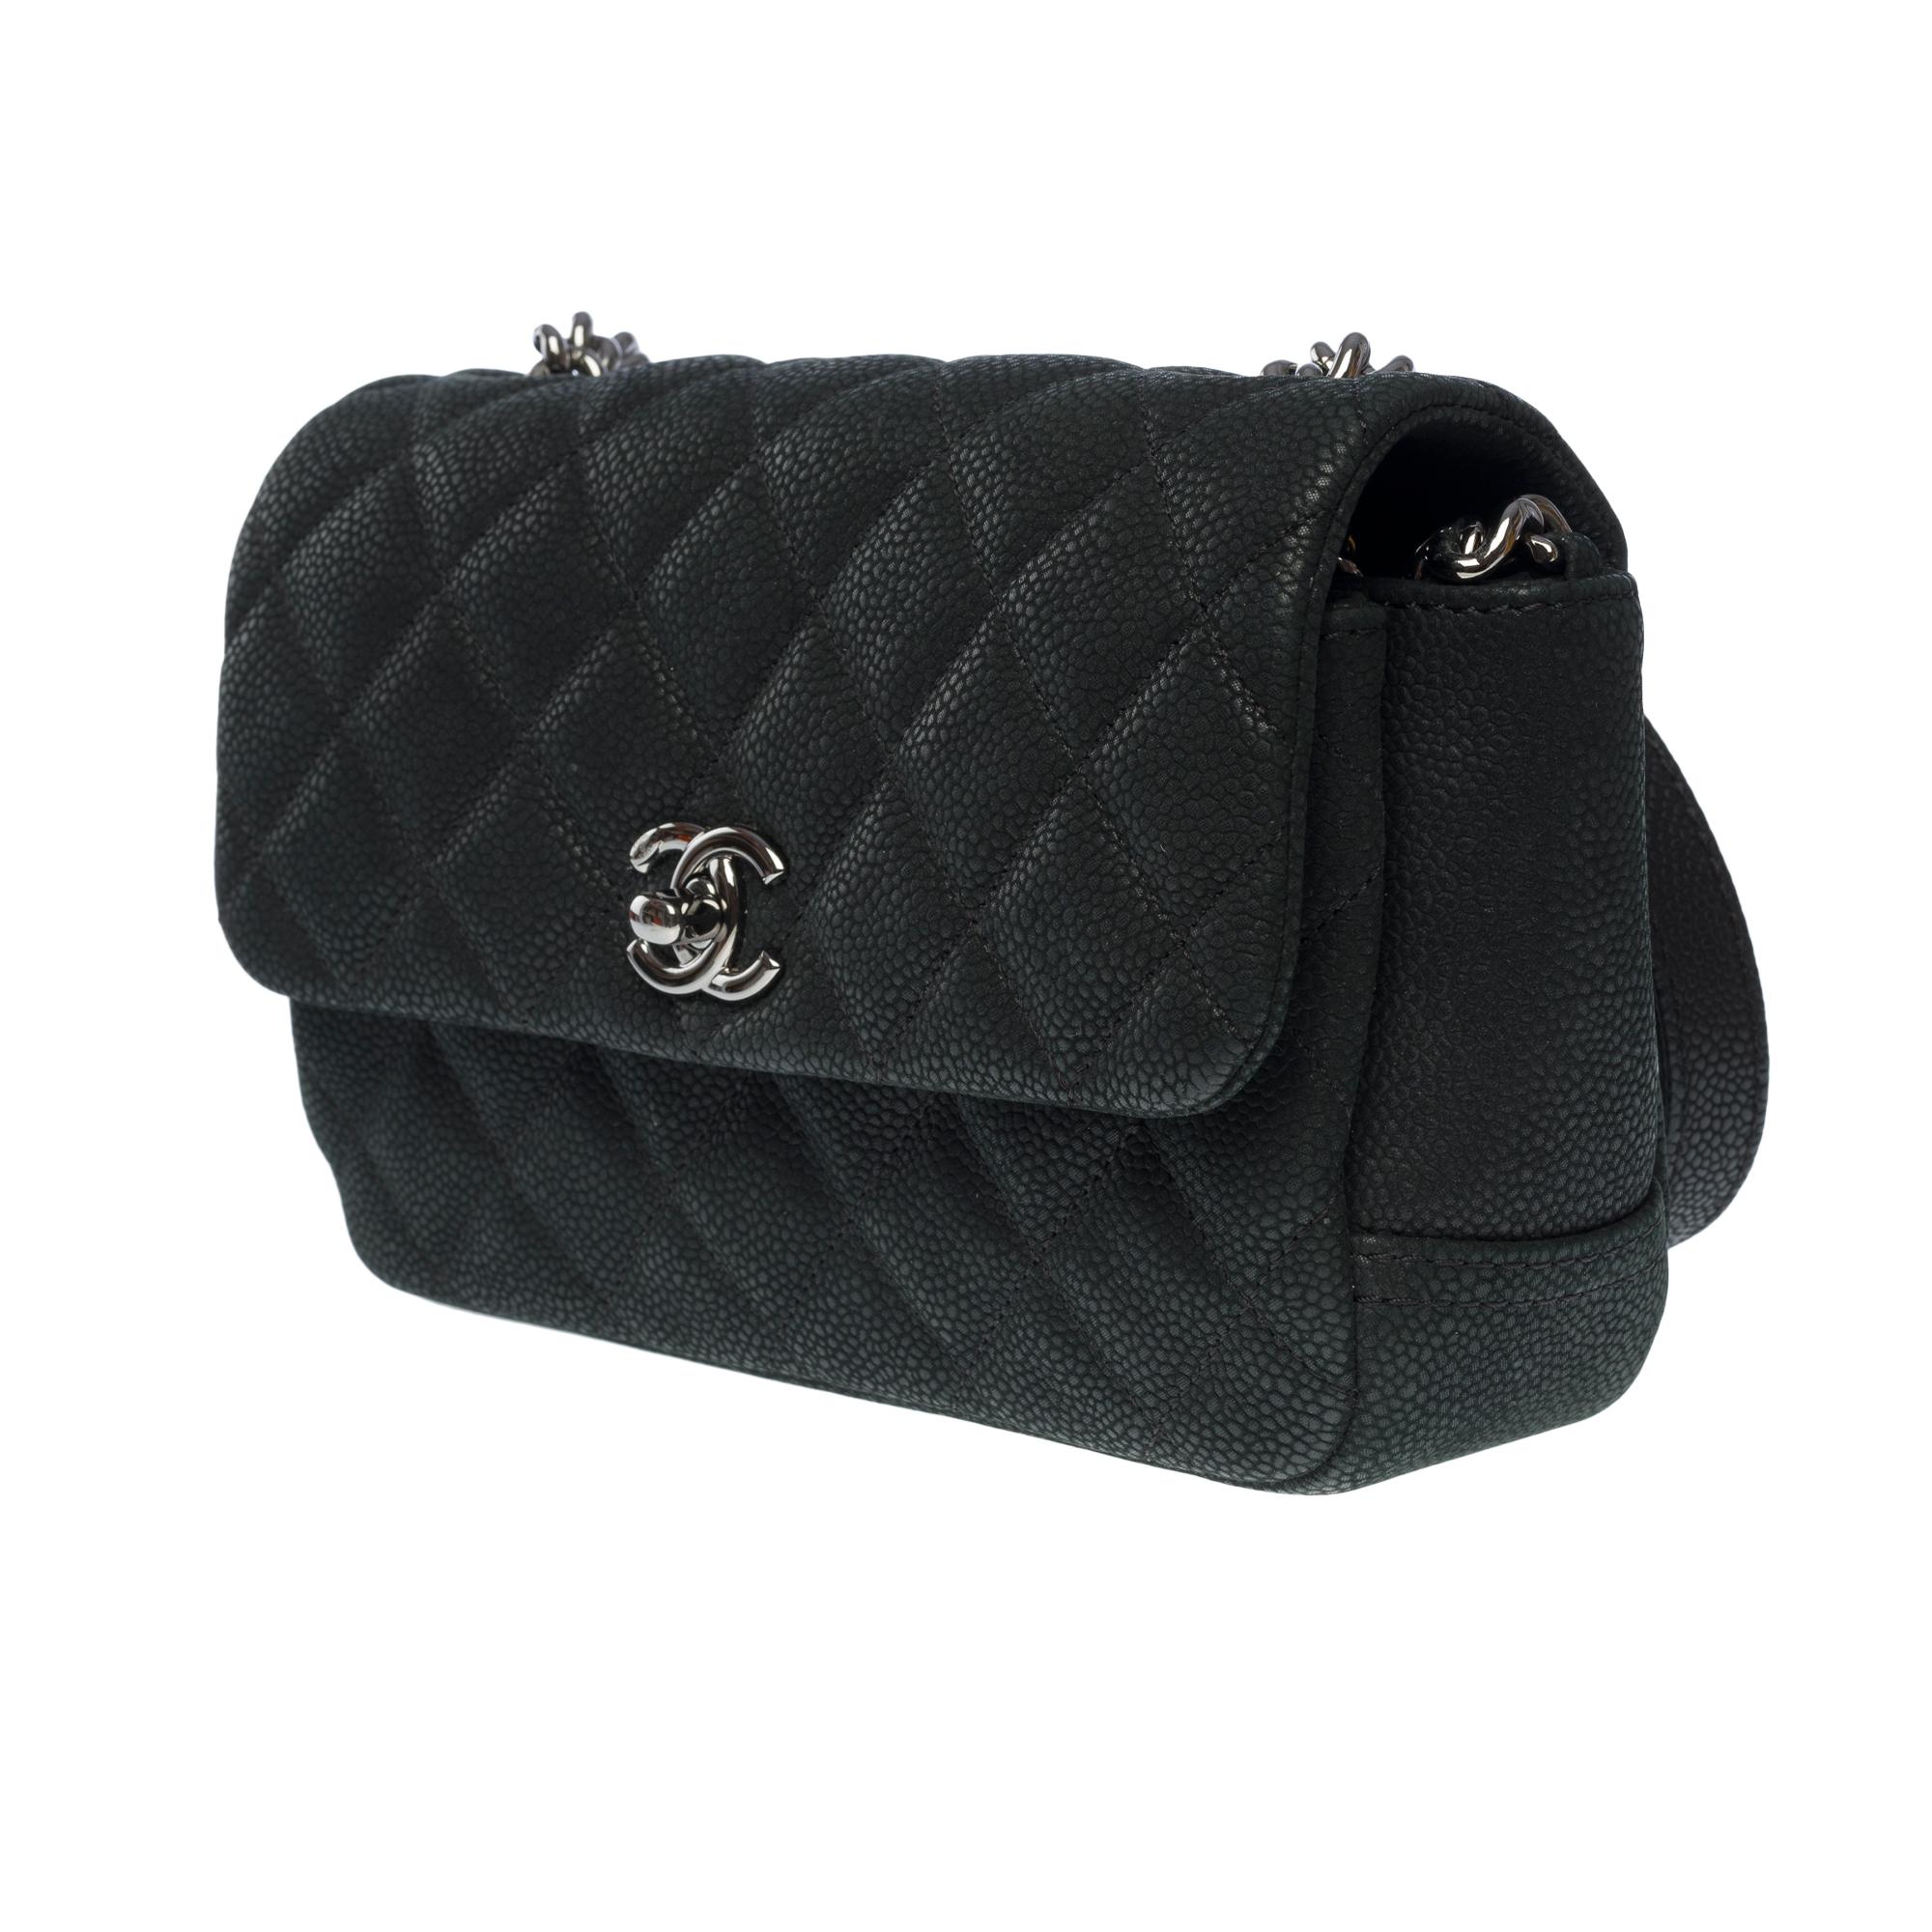 Women's Amazing Chanel Timeless Mini flap shoulder bag in Black Caviar leather, SHW For Sale